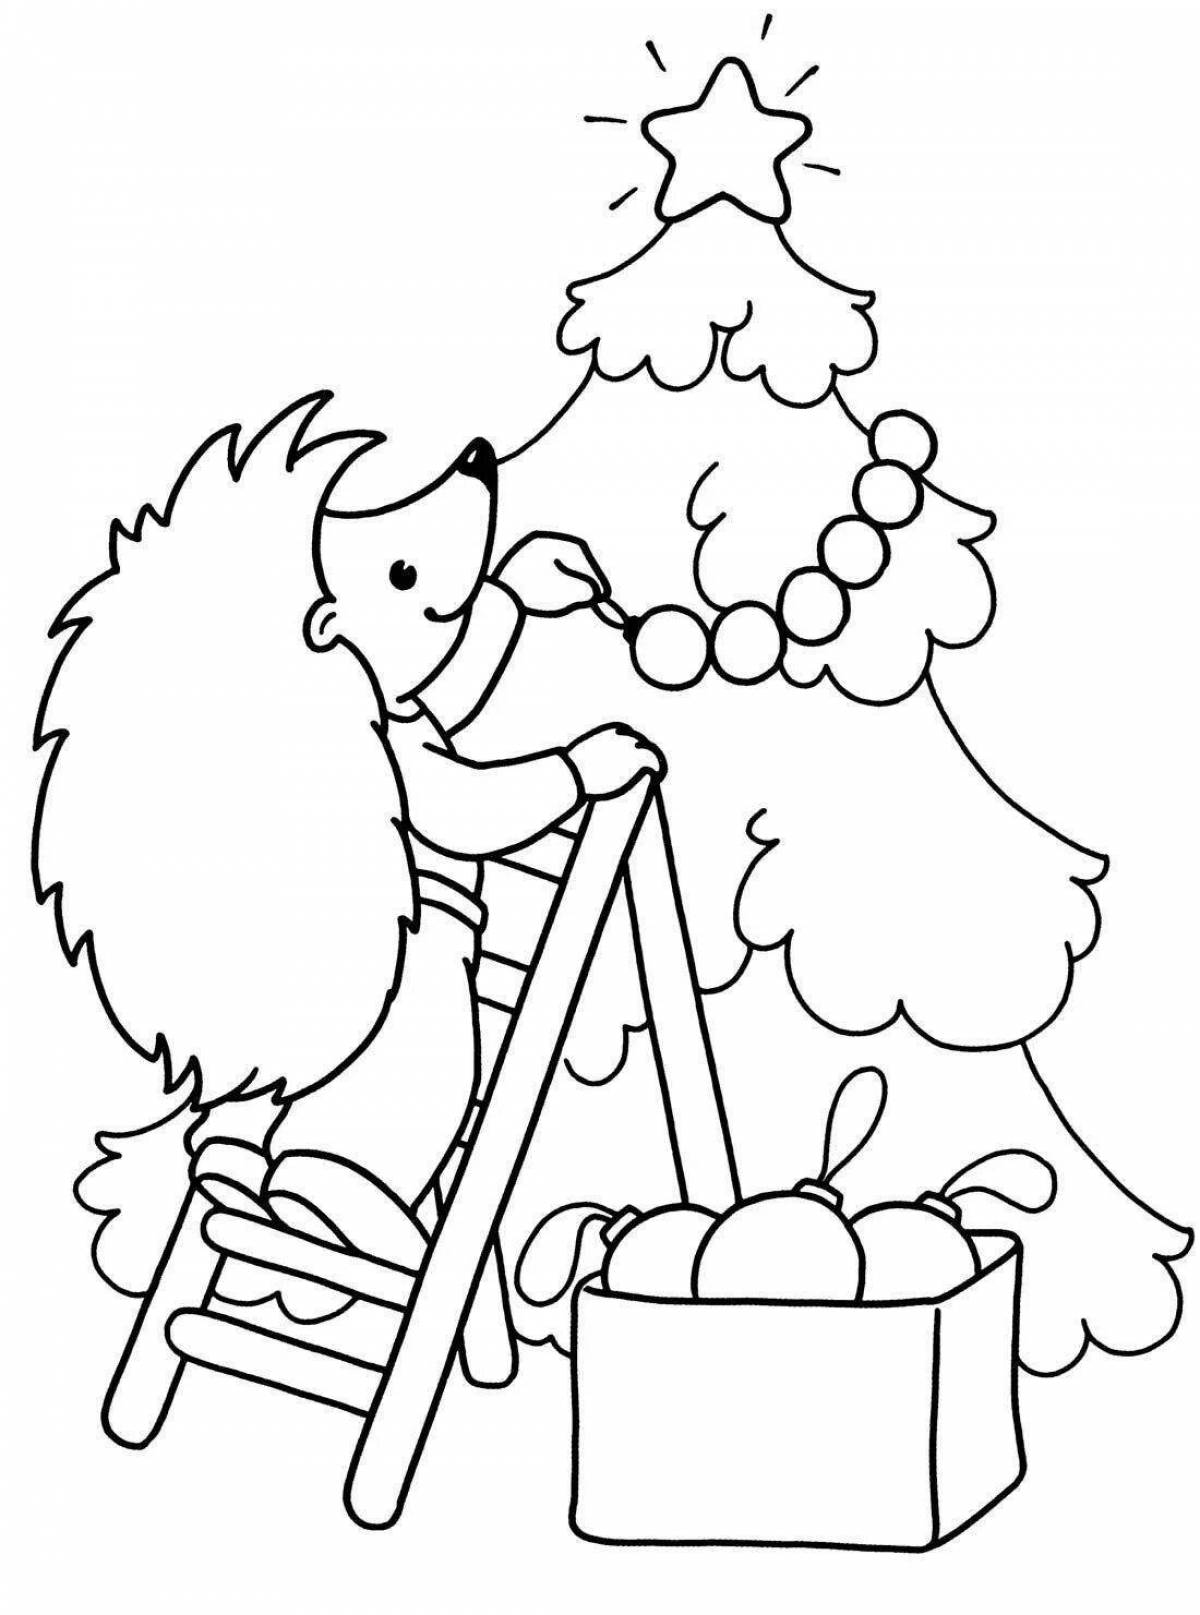 Colorful Christmas coloring book for children